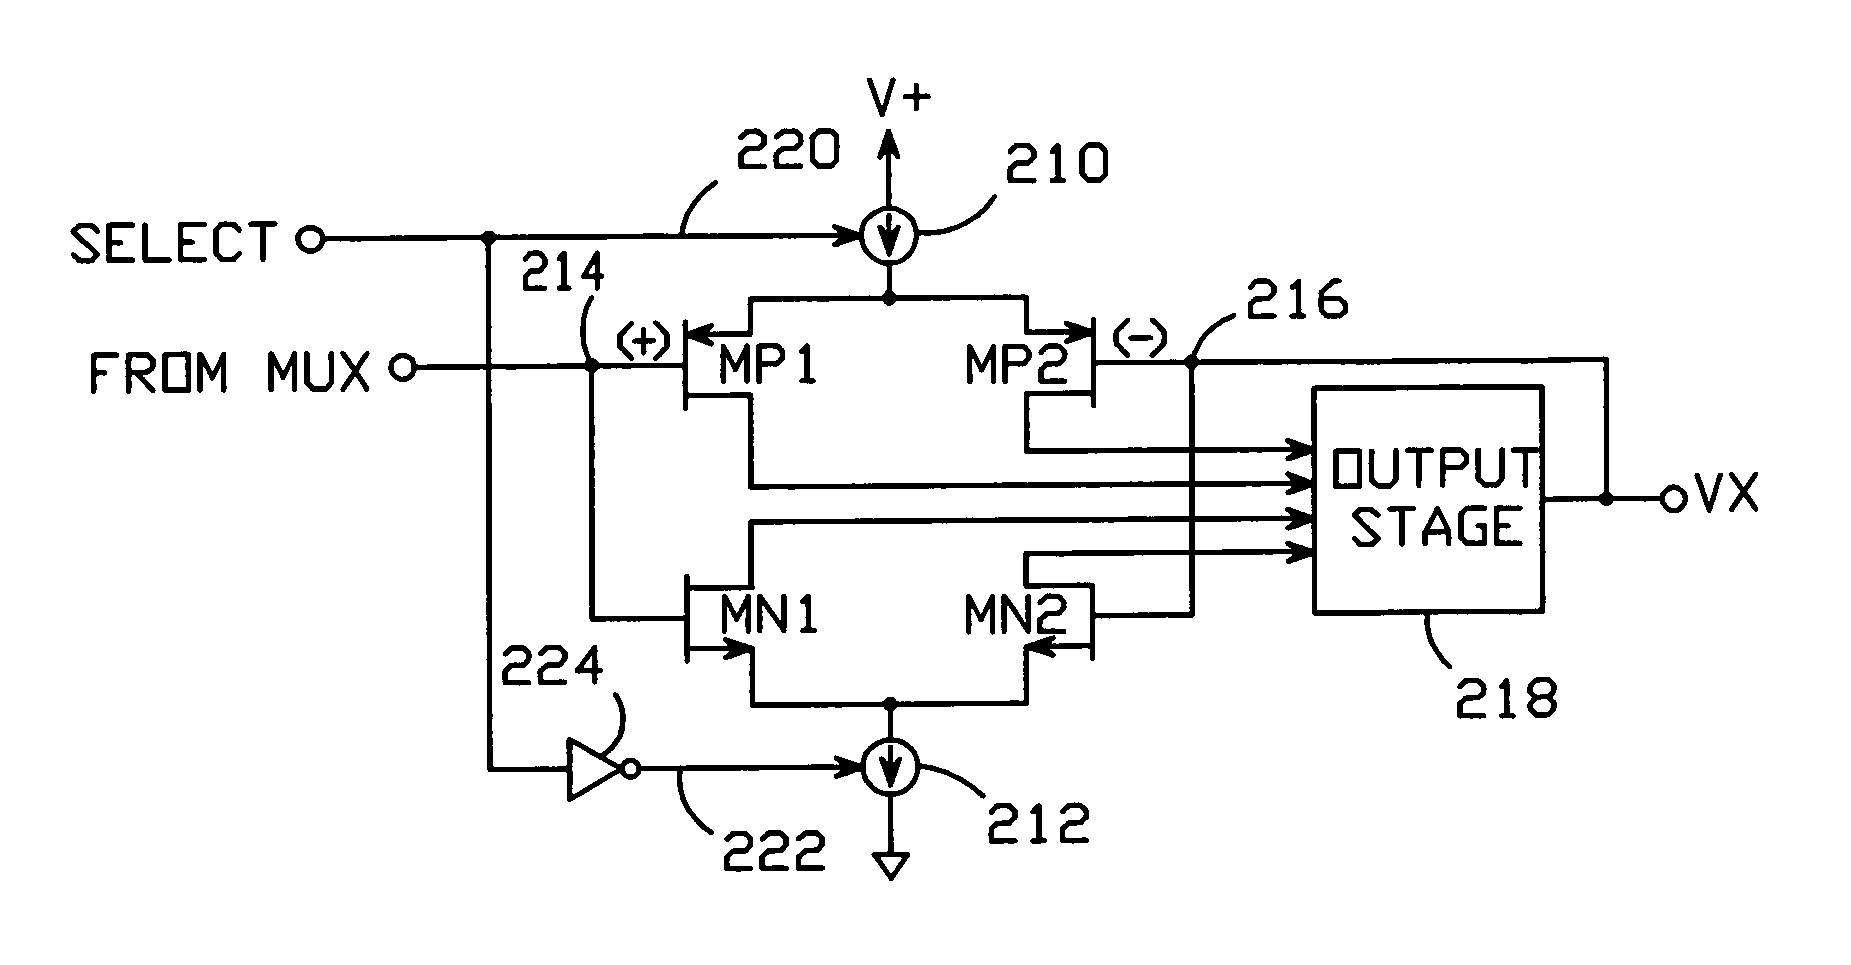 Rail-to-rail amplifier for use in line-inversion LCD grayscale reference generator